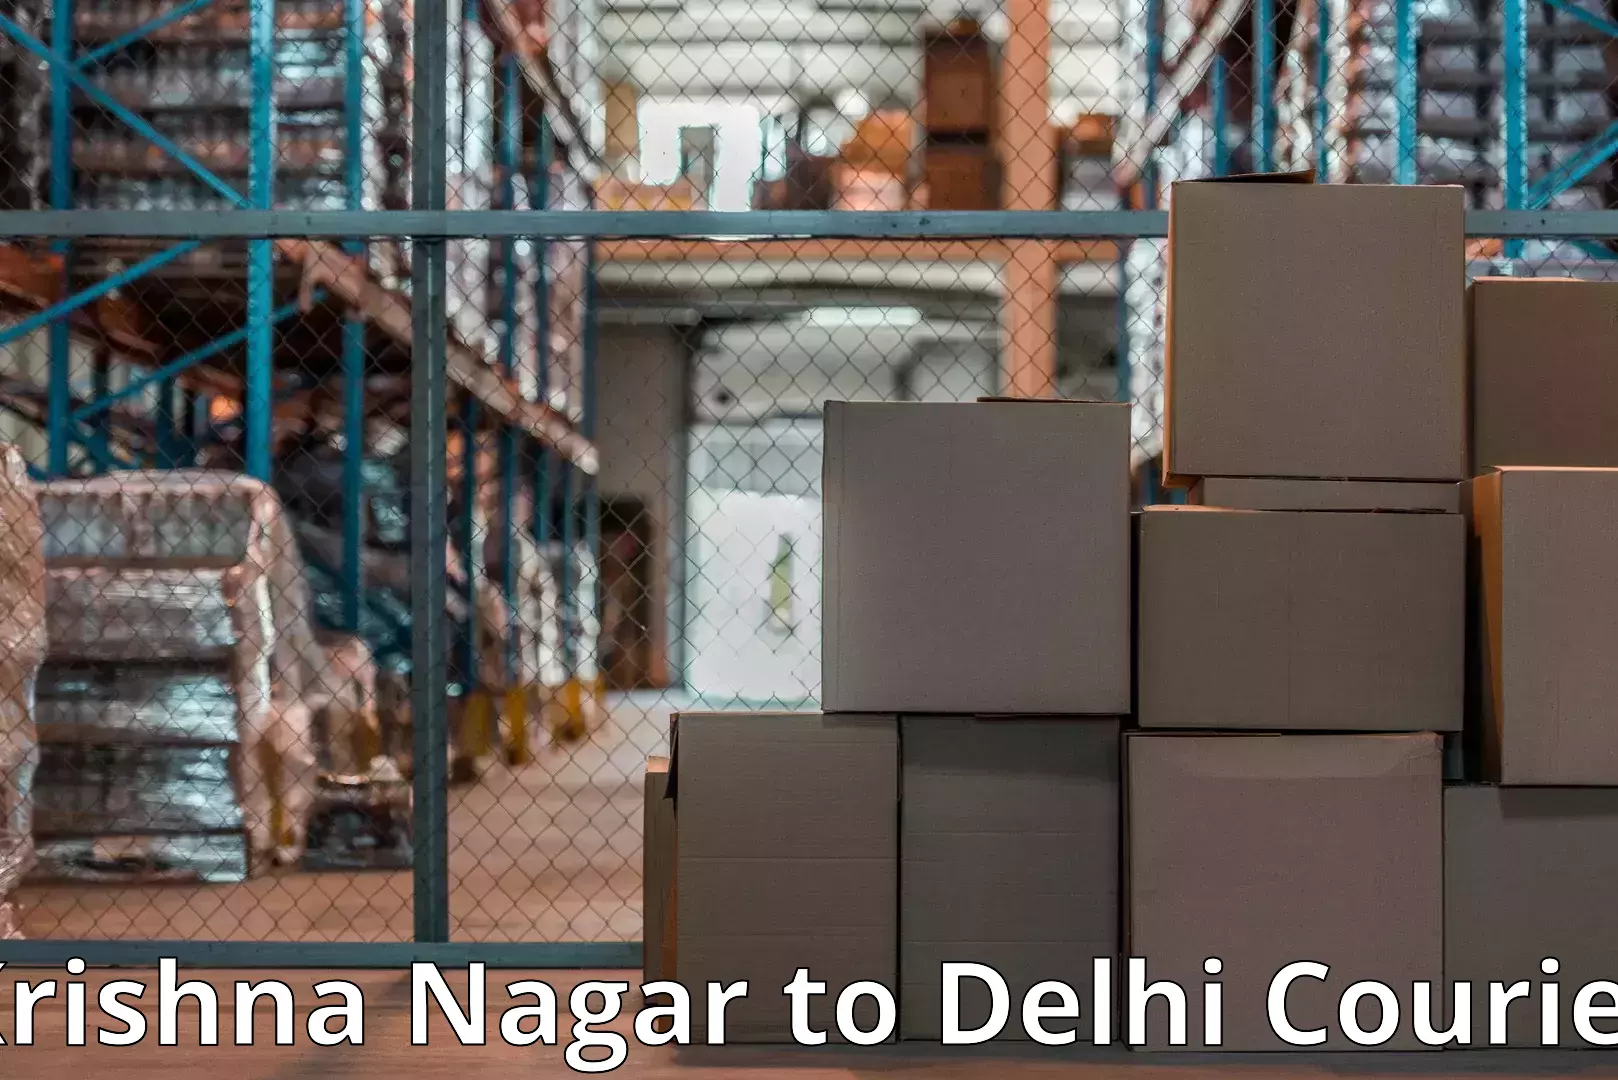 Trusted relocation experts Krishna Nagar to Lodhi Road